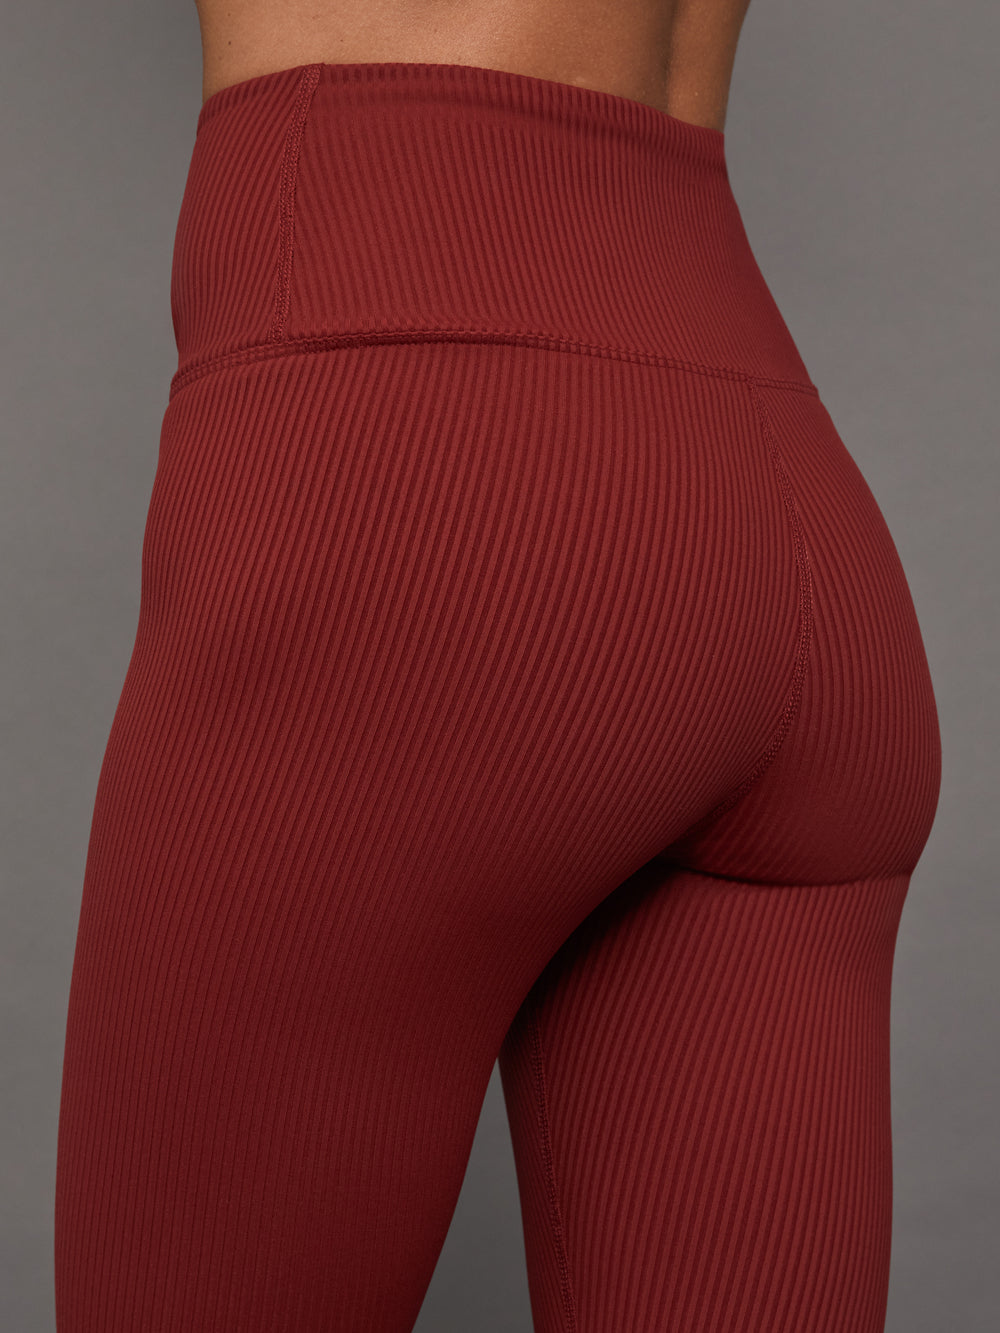 Carbon 38 Ribbed 7/8 Leggings Red Size XS - $45 - From Abigail